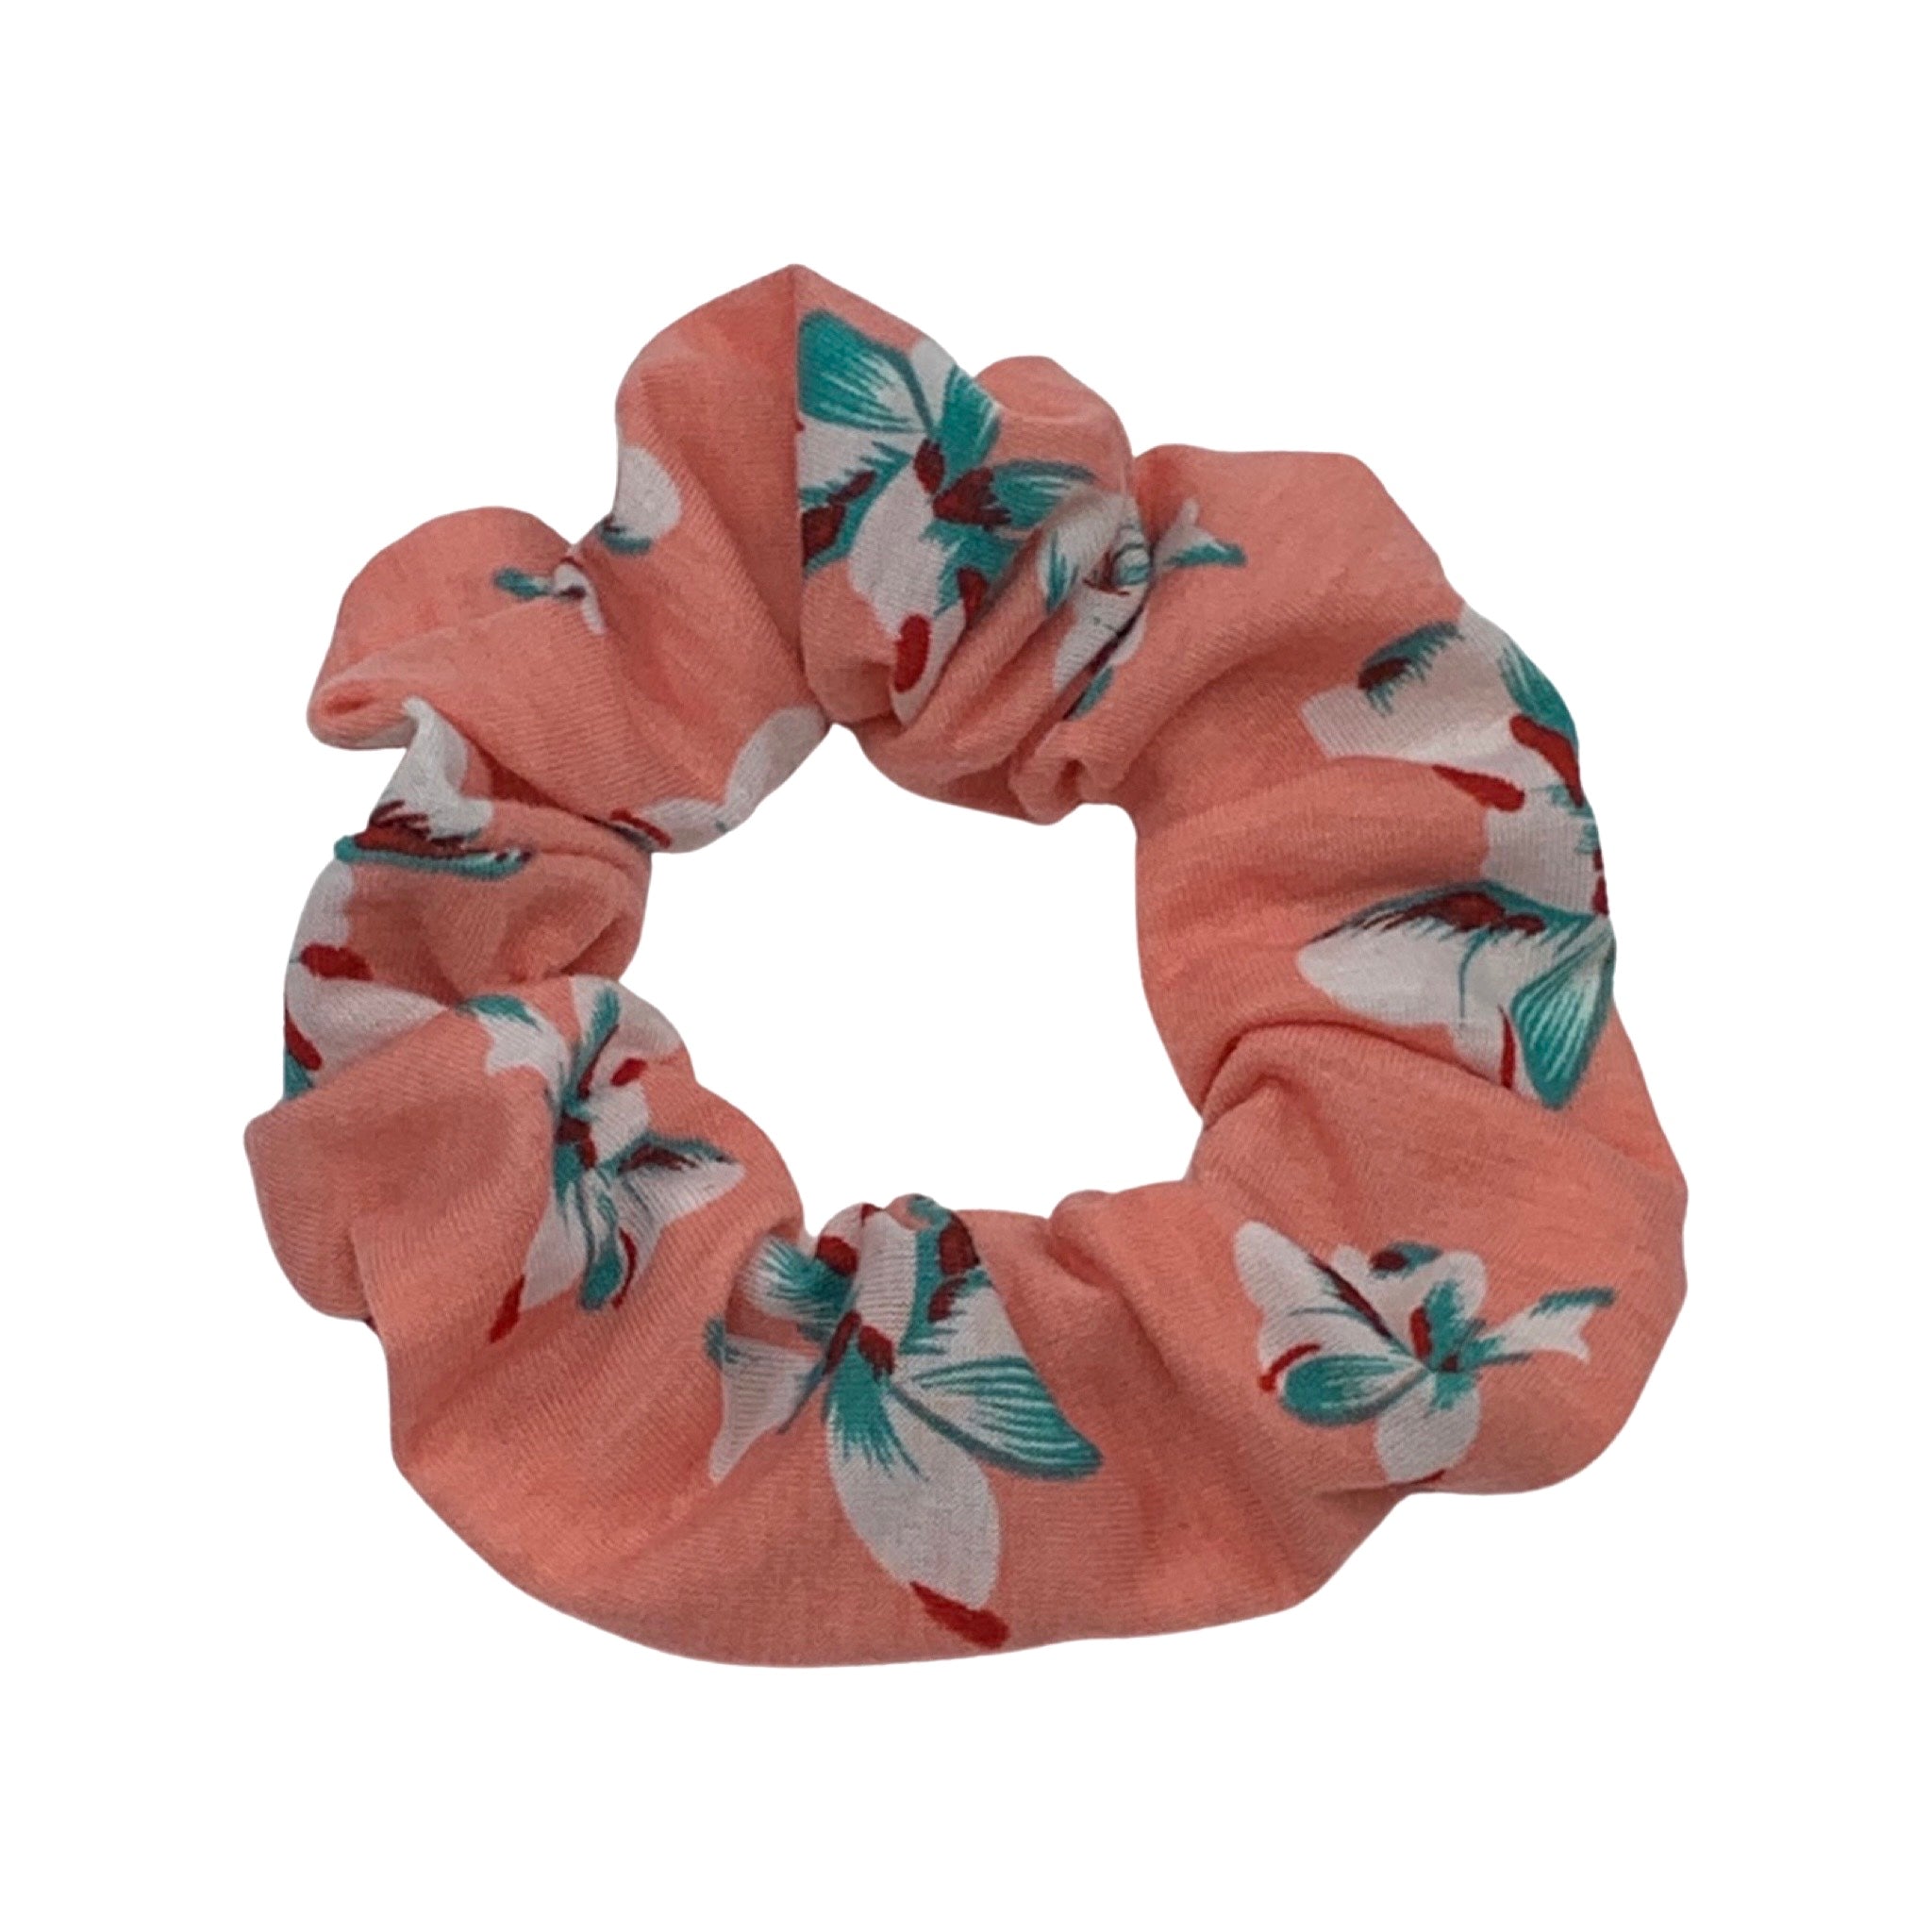 Peach & Teal Floral Thank You Cotton Scrunchie Filler Pack, 1 per pack. Now available with Logo Sticker Add On Option!